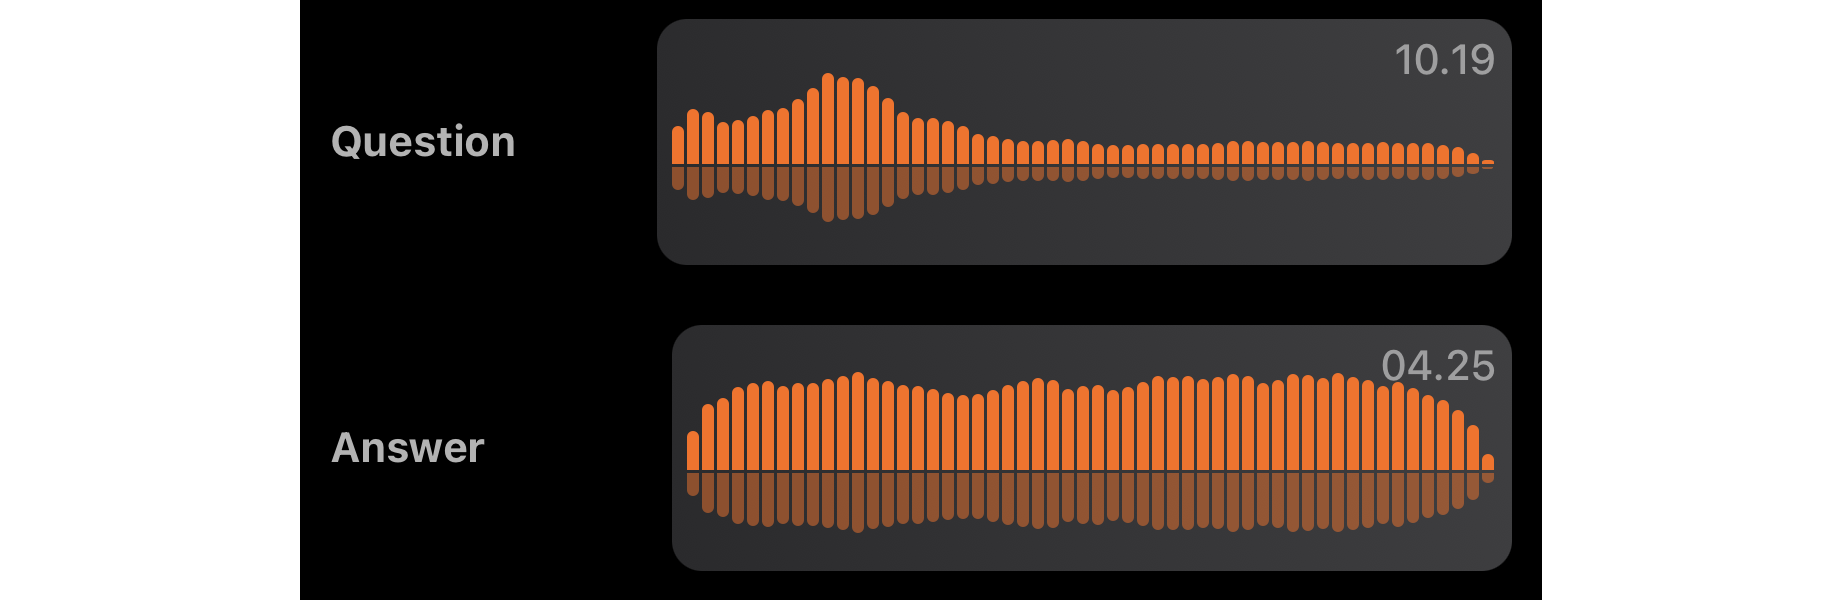 Question-answer waveforms